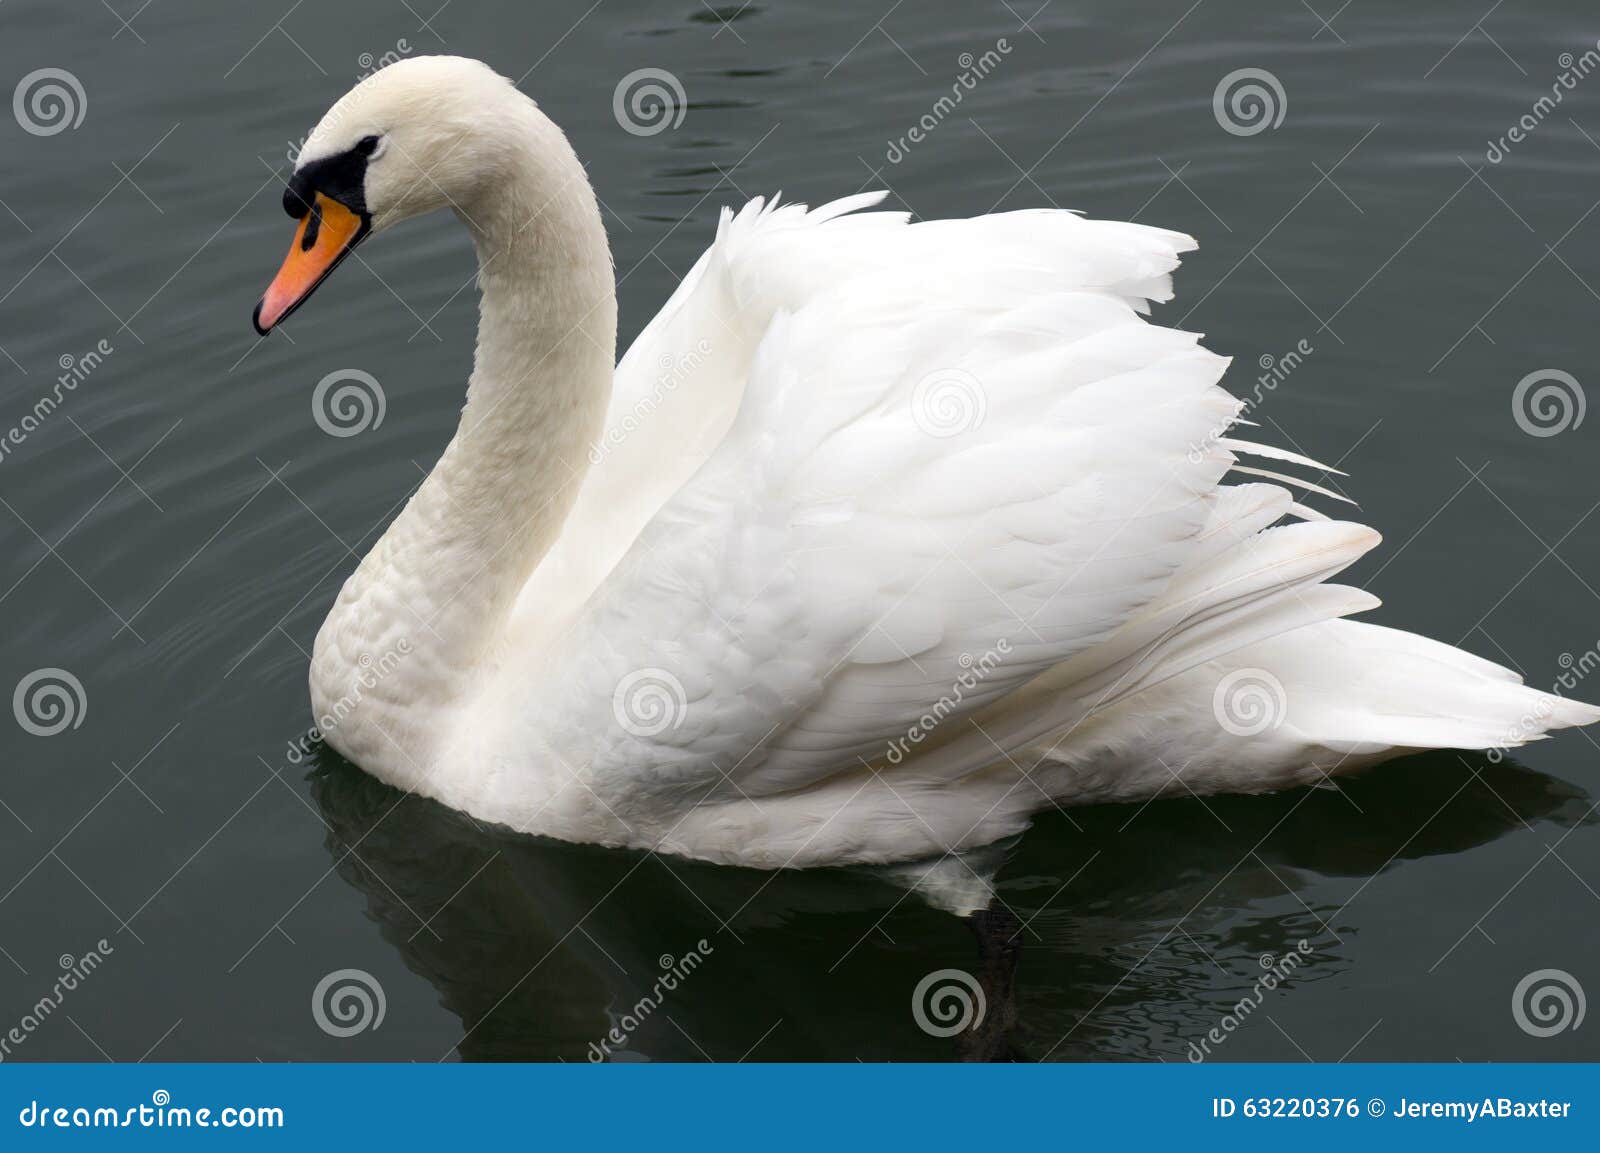 https://thumbs.dreamstime.com/z/swan-fine-fishing-wire-around-neck-highlights-dangers-to-beautiful-creature-63220376.jpg